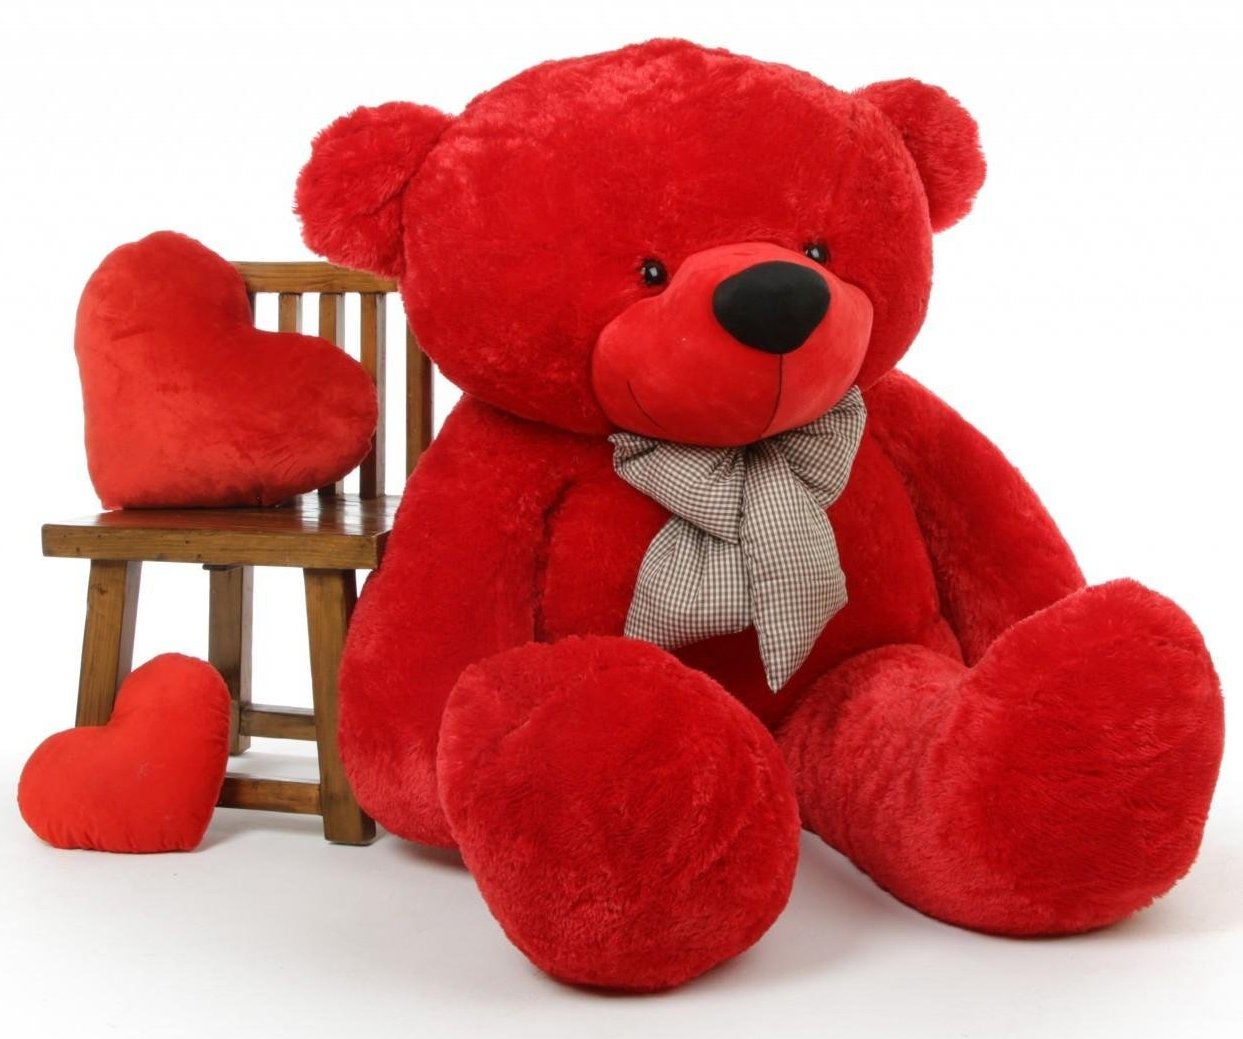 The Ultimate Collection of Cute Teddy Day Images - Over 999 Adorable ...